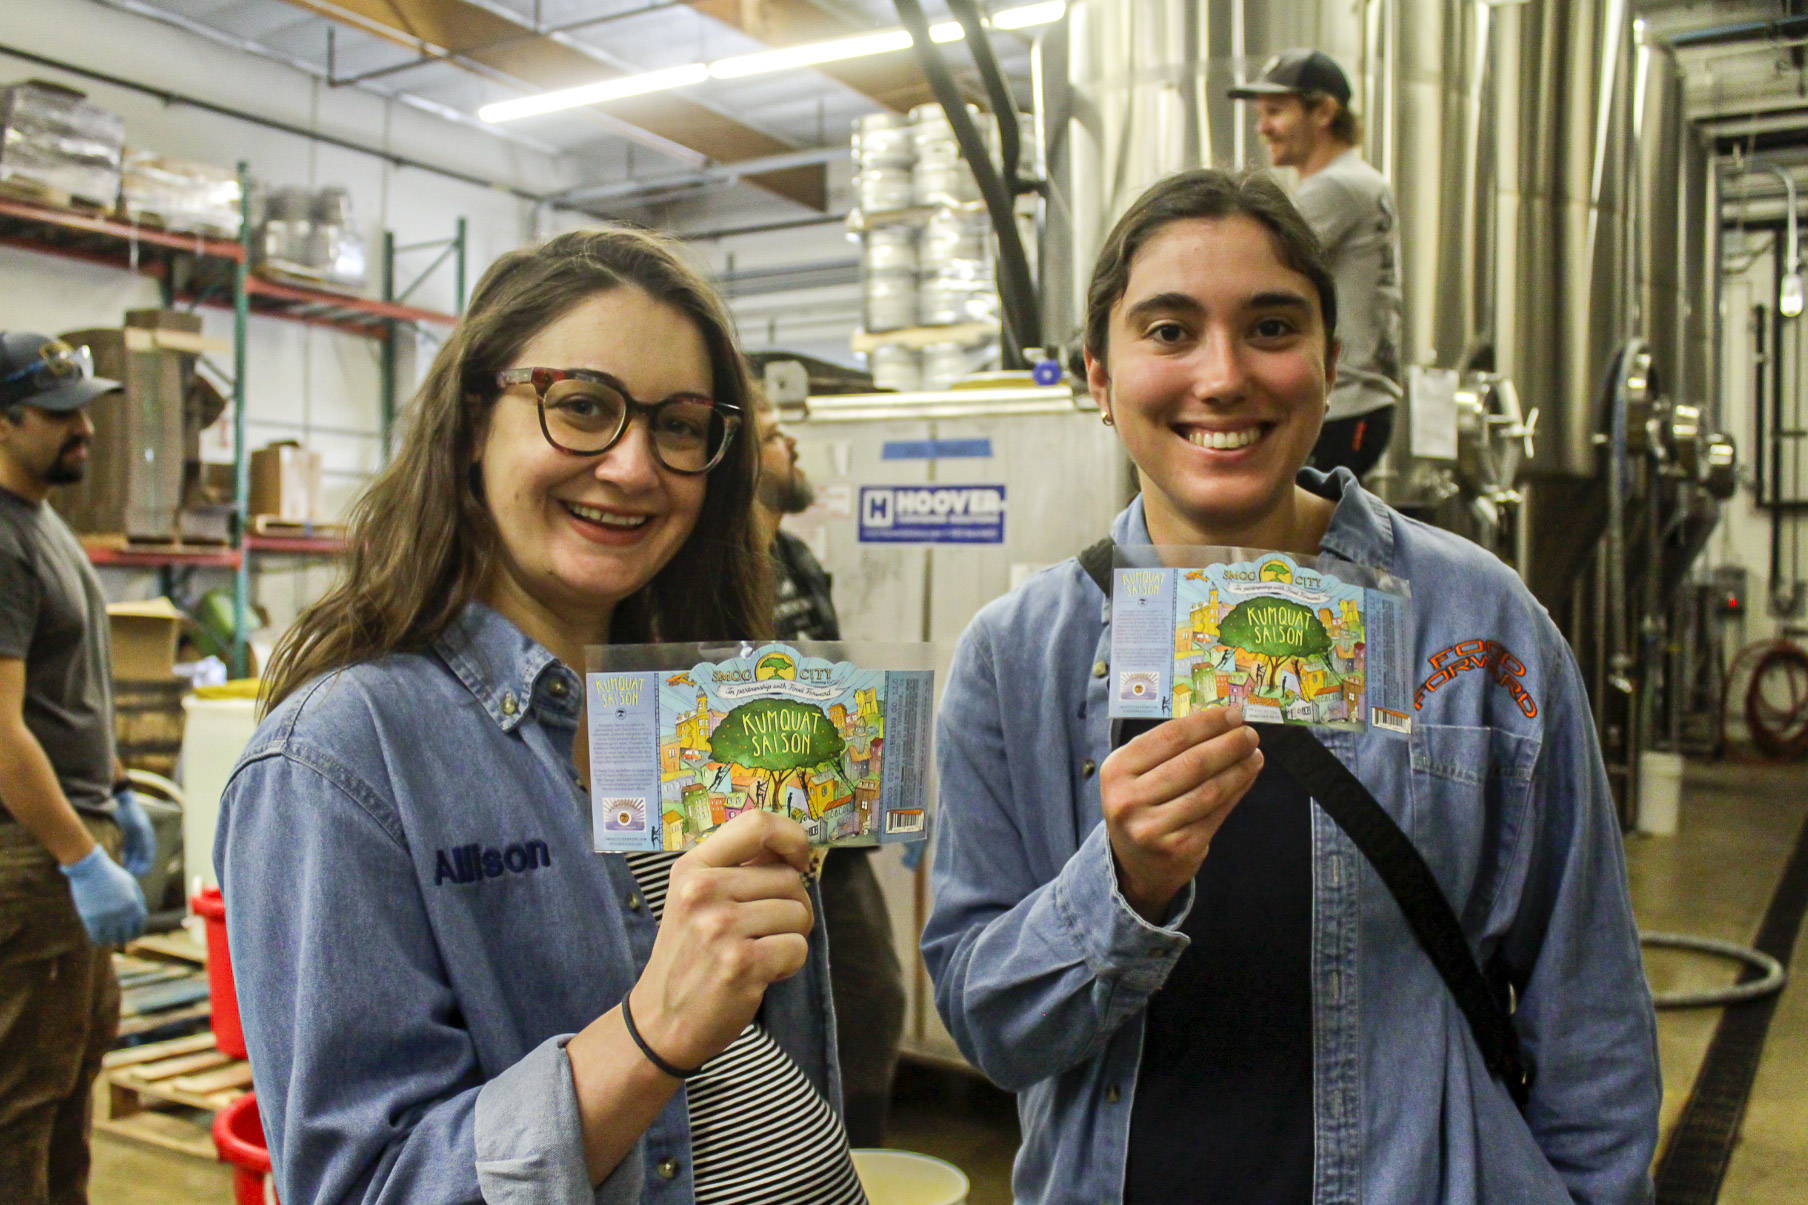 Two members of Food Forward holding Kumquat Saison beer labels at the Smog City Brewery